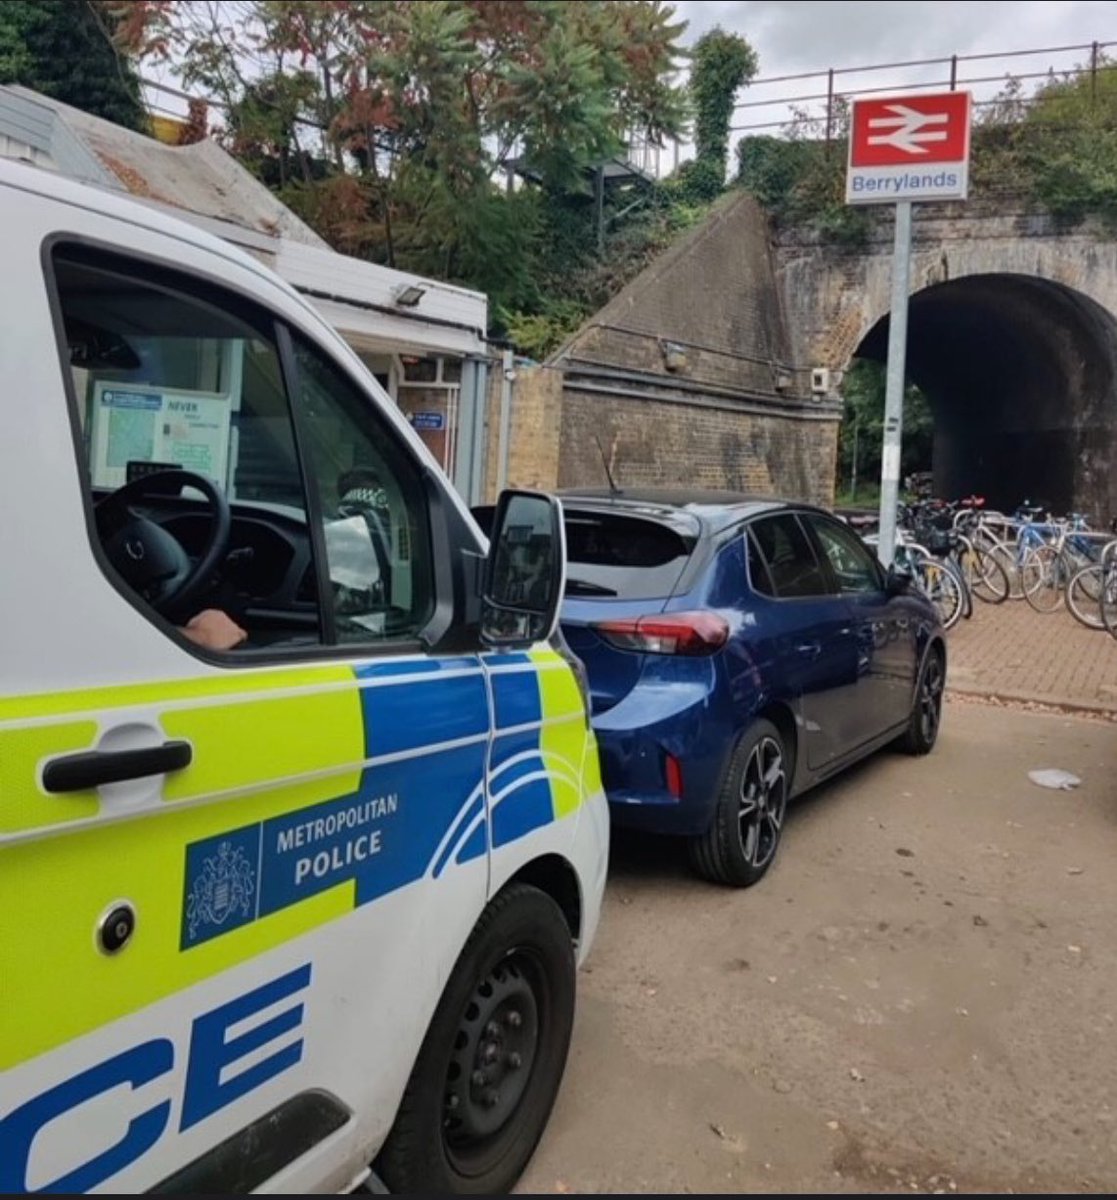 FREE bike marking available today (13th April) between 11-12 outside BERRYLANDS STATION, CHILTERN DRIVE. Get your bike marked to deter thieves & increase the chances of your bike being returned in the event of it being stolen bikeregister.com/advice/how-it-…